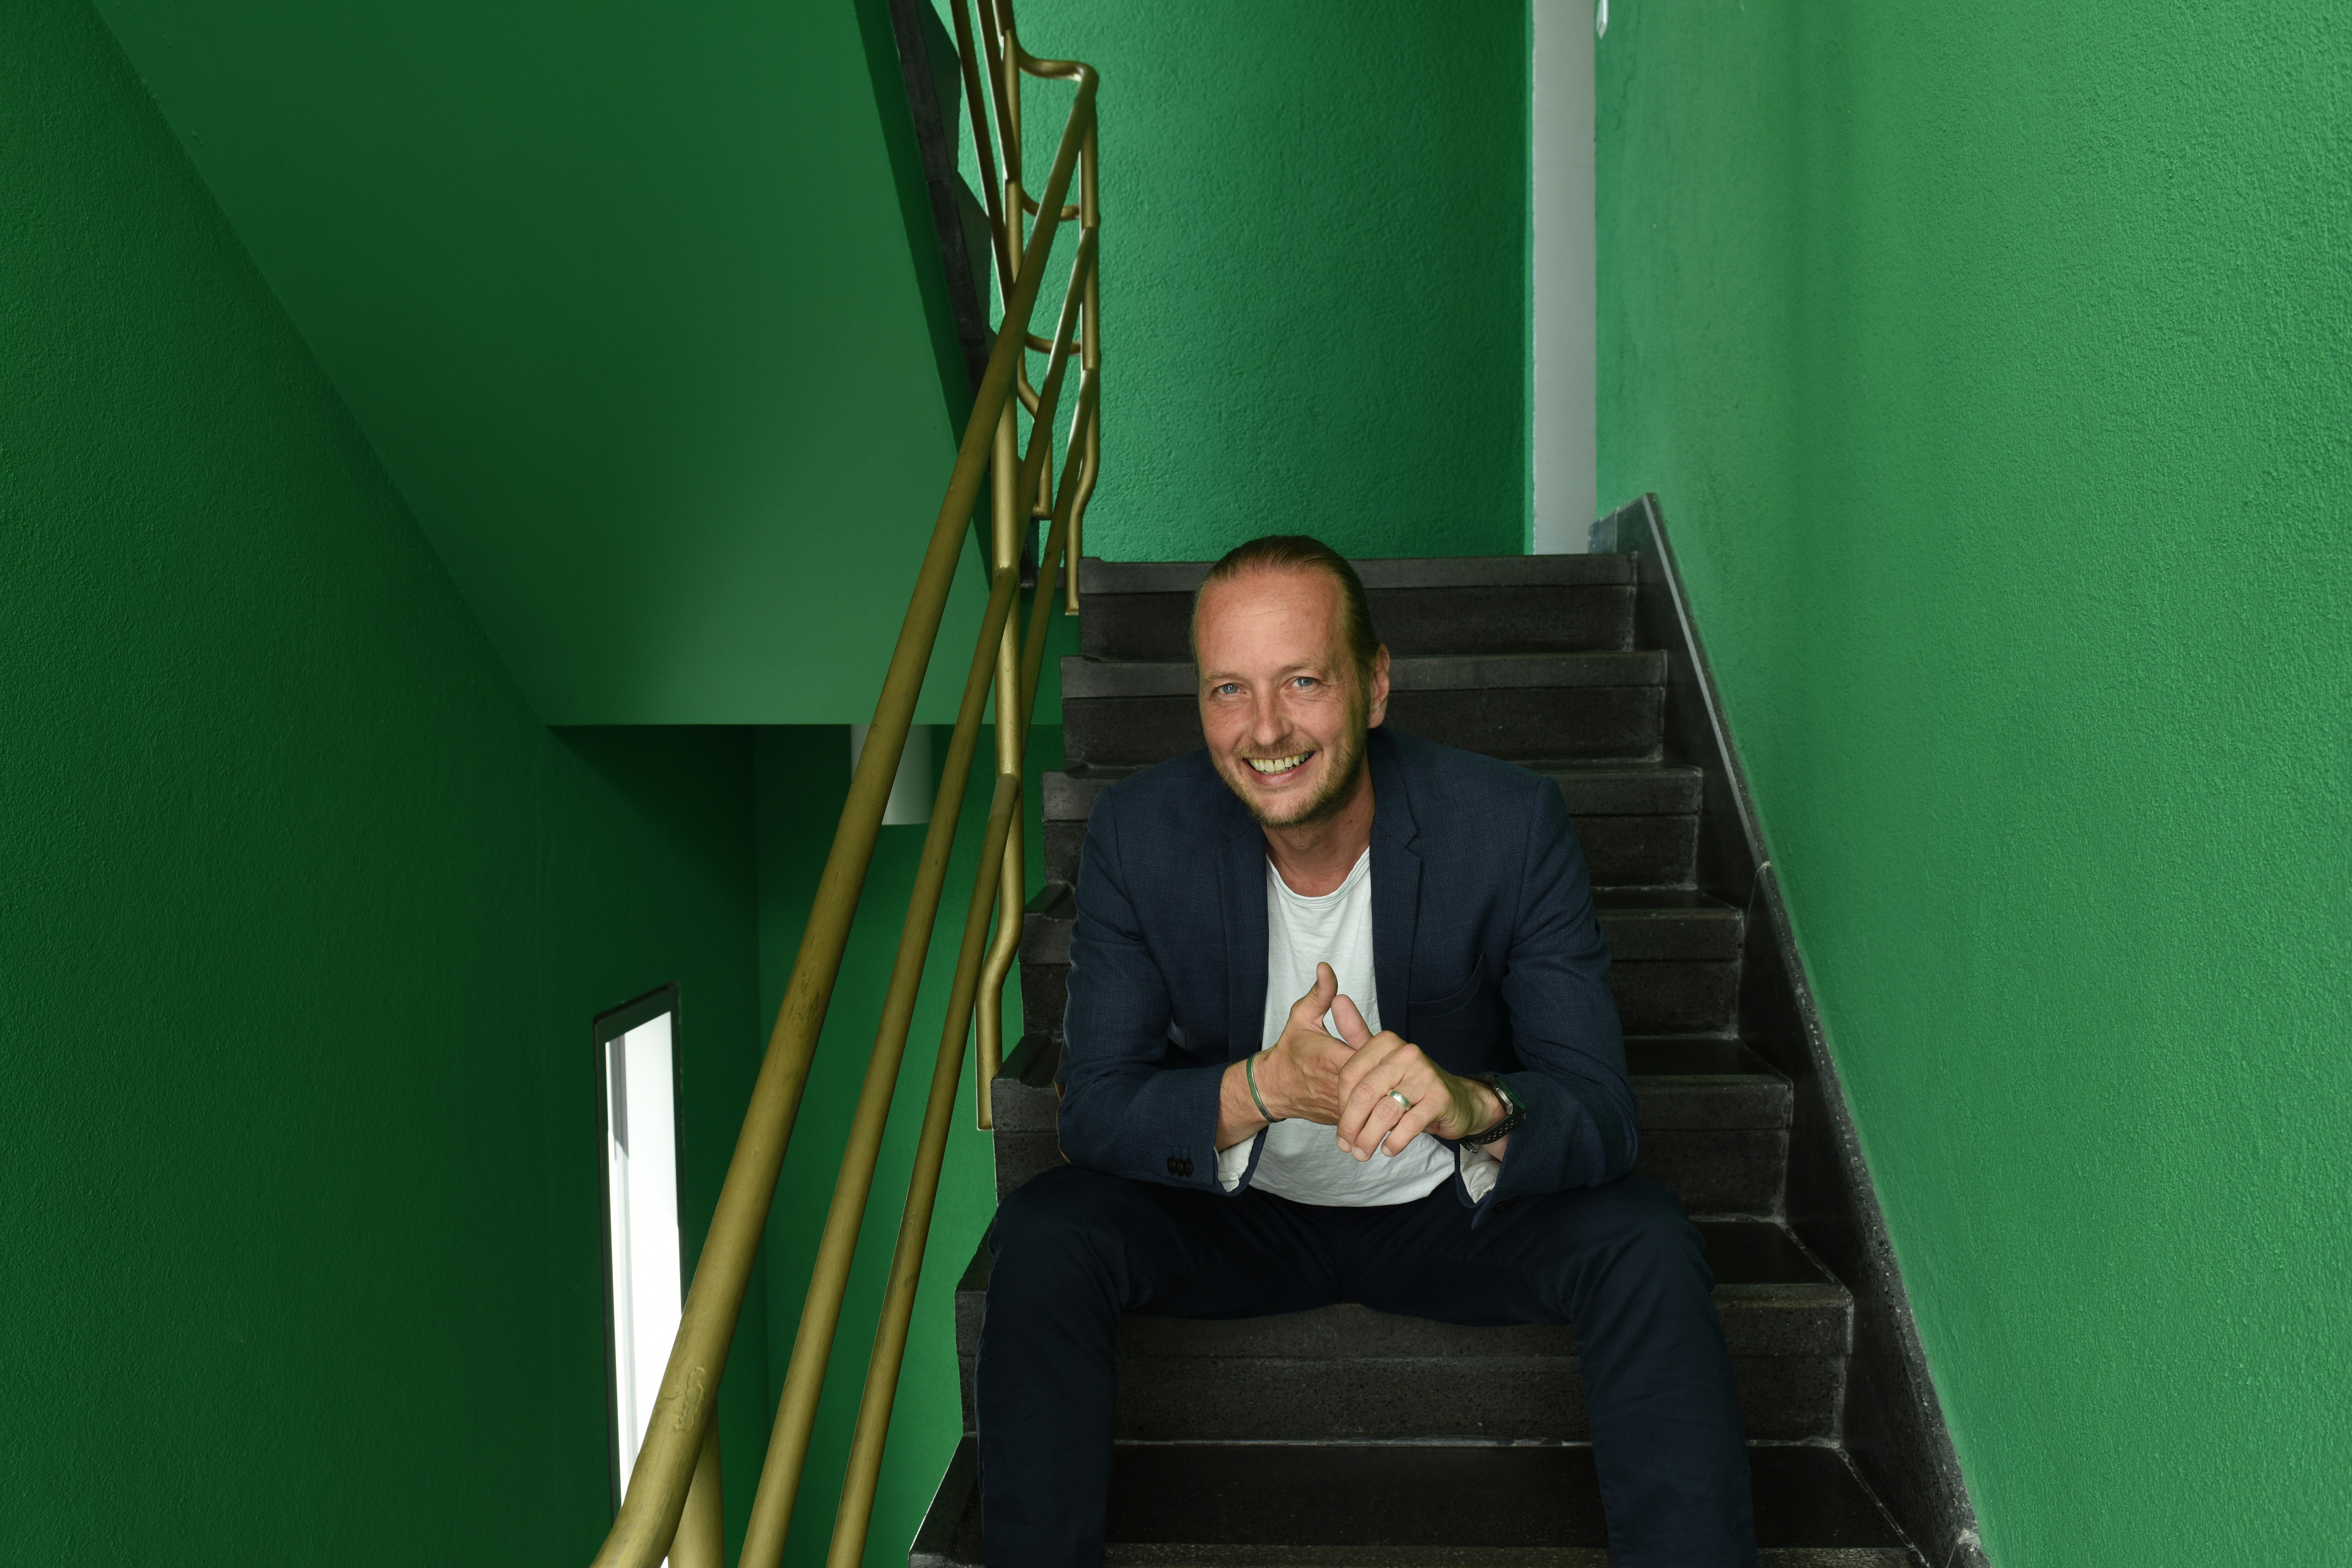 Hannes Benjamin Weikert sitting in a stairwell with green walls.